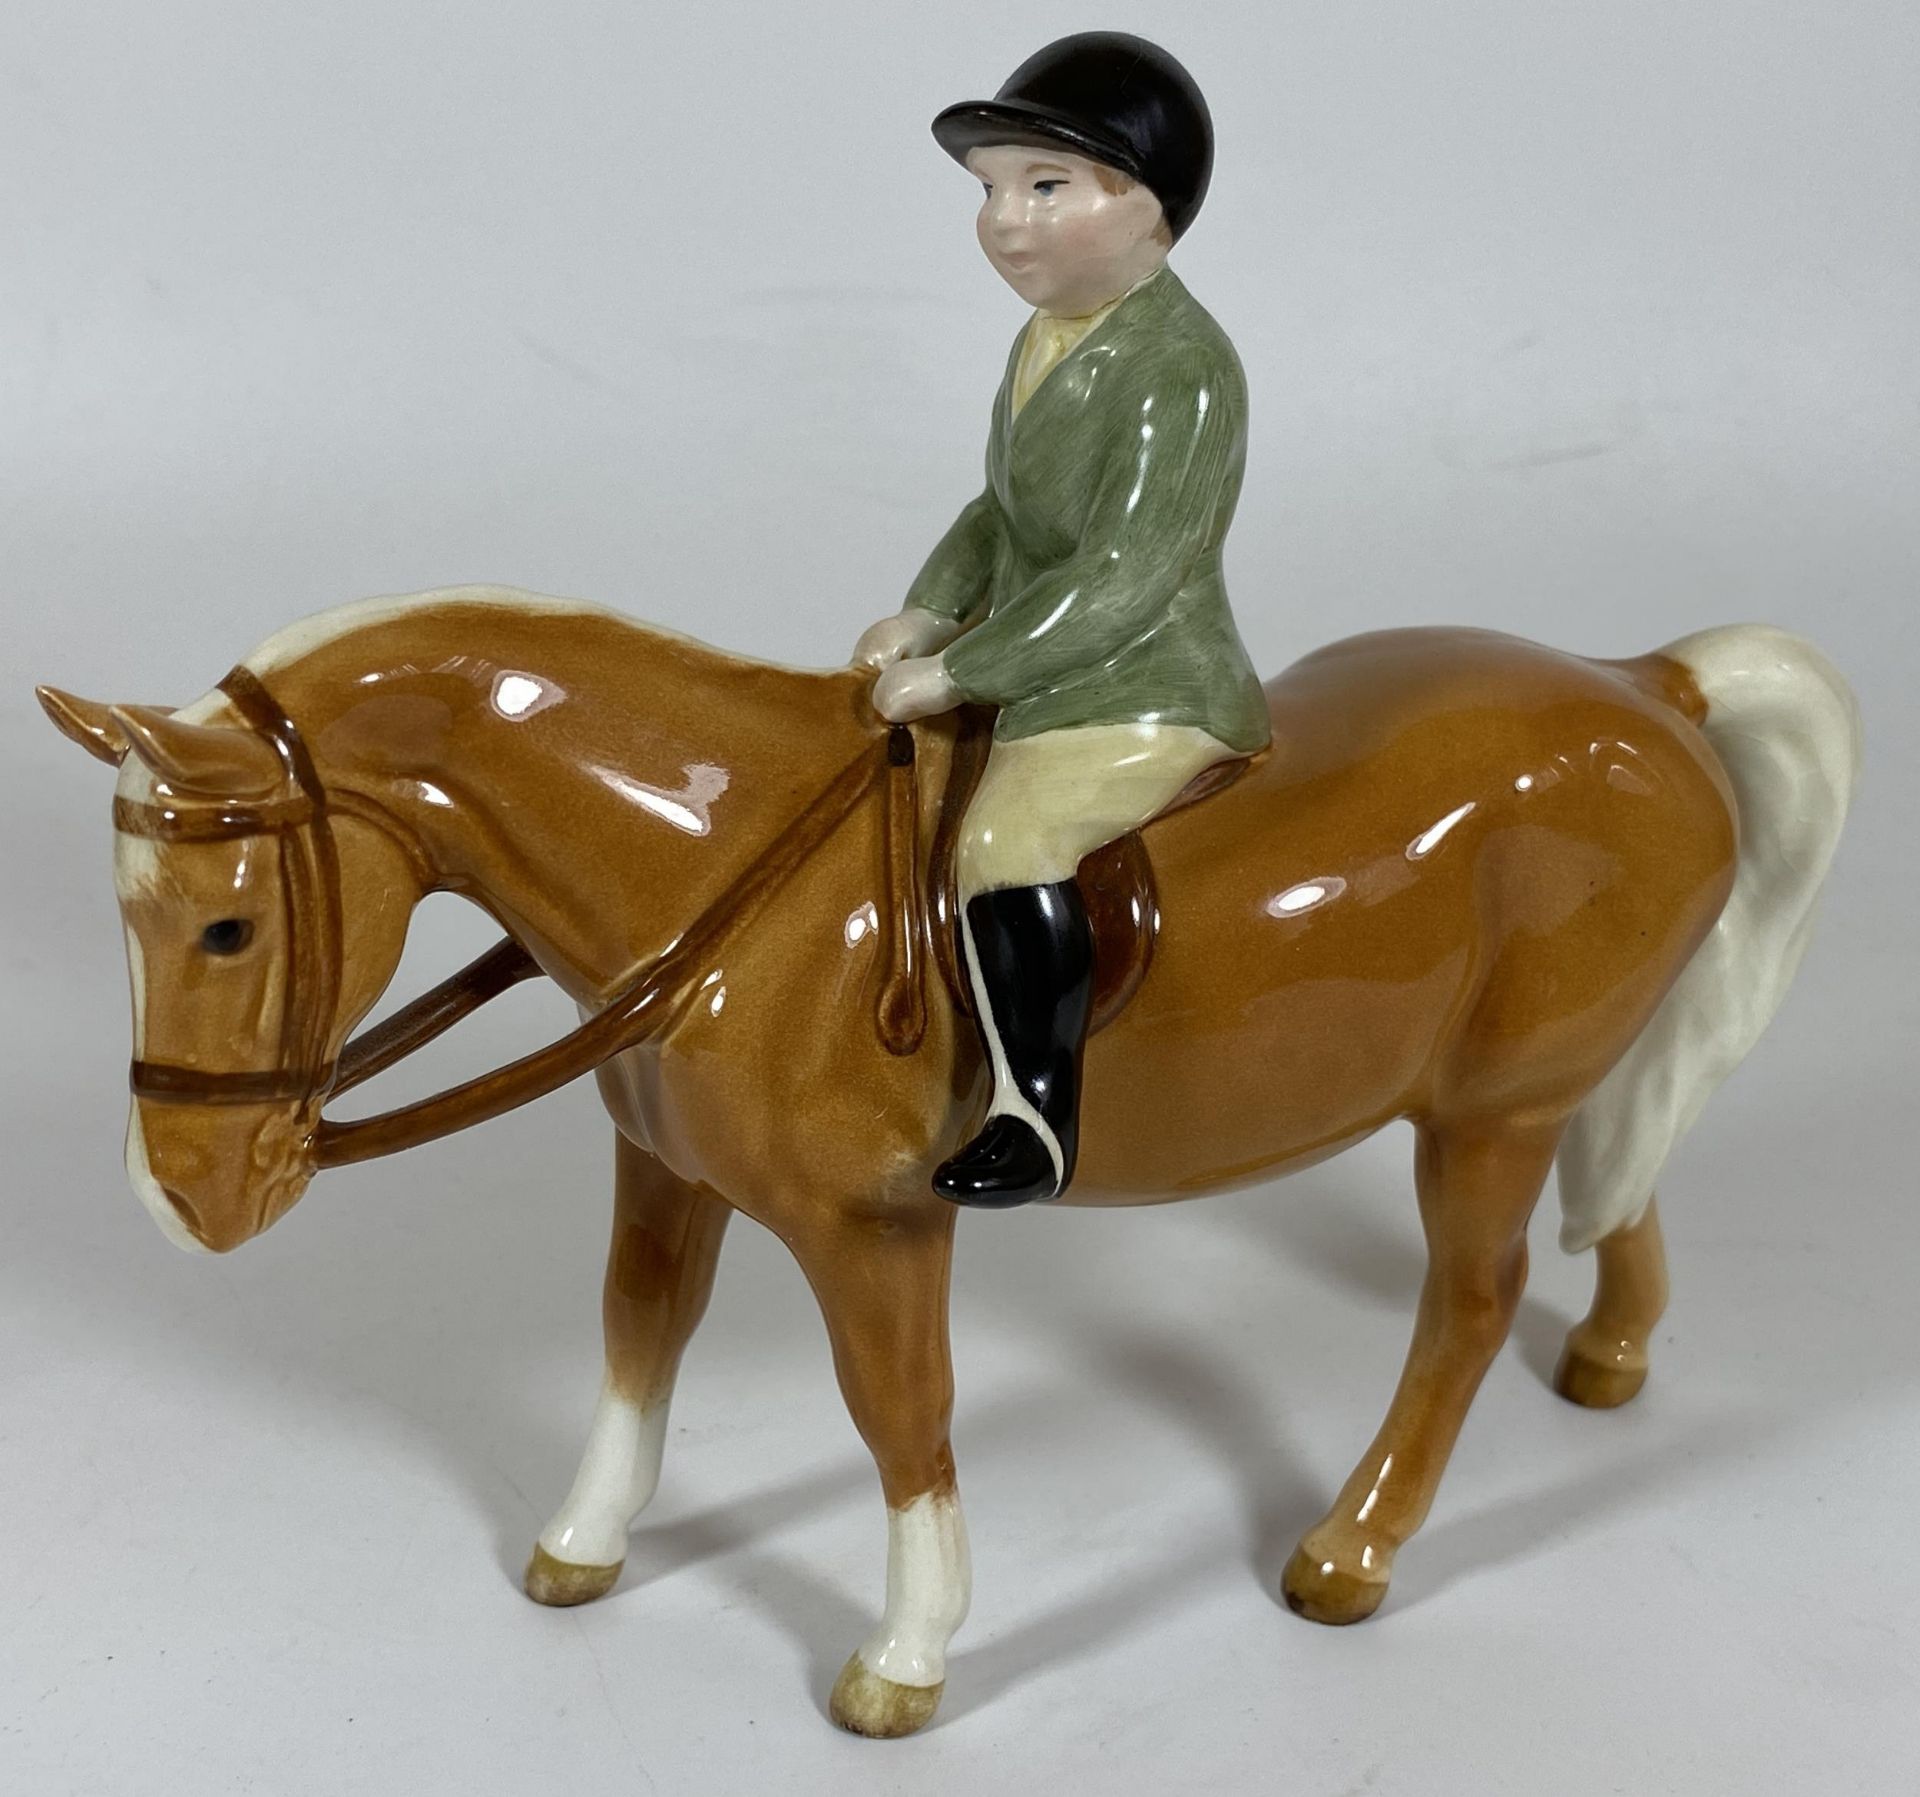 A BESWICK BOY ON PALOMINO PONY, MODEL NO. 1500, (HEAD RE-GLUED) ALSO FRONT LEG ALSO RE-GLUED